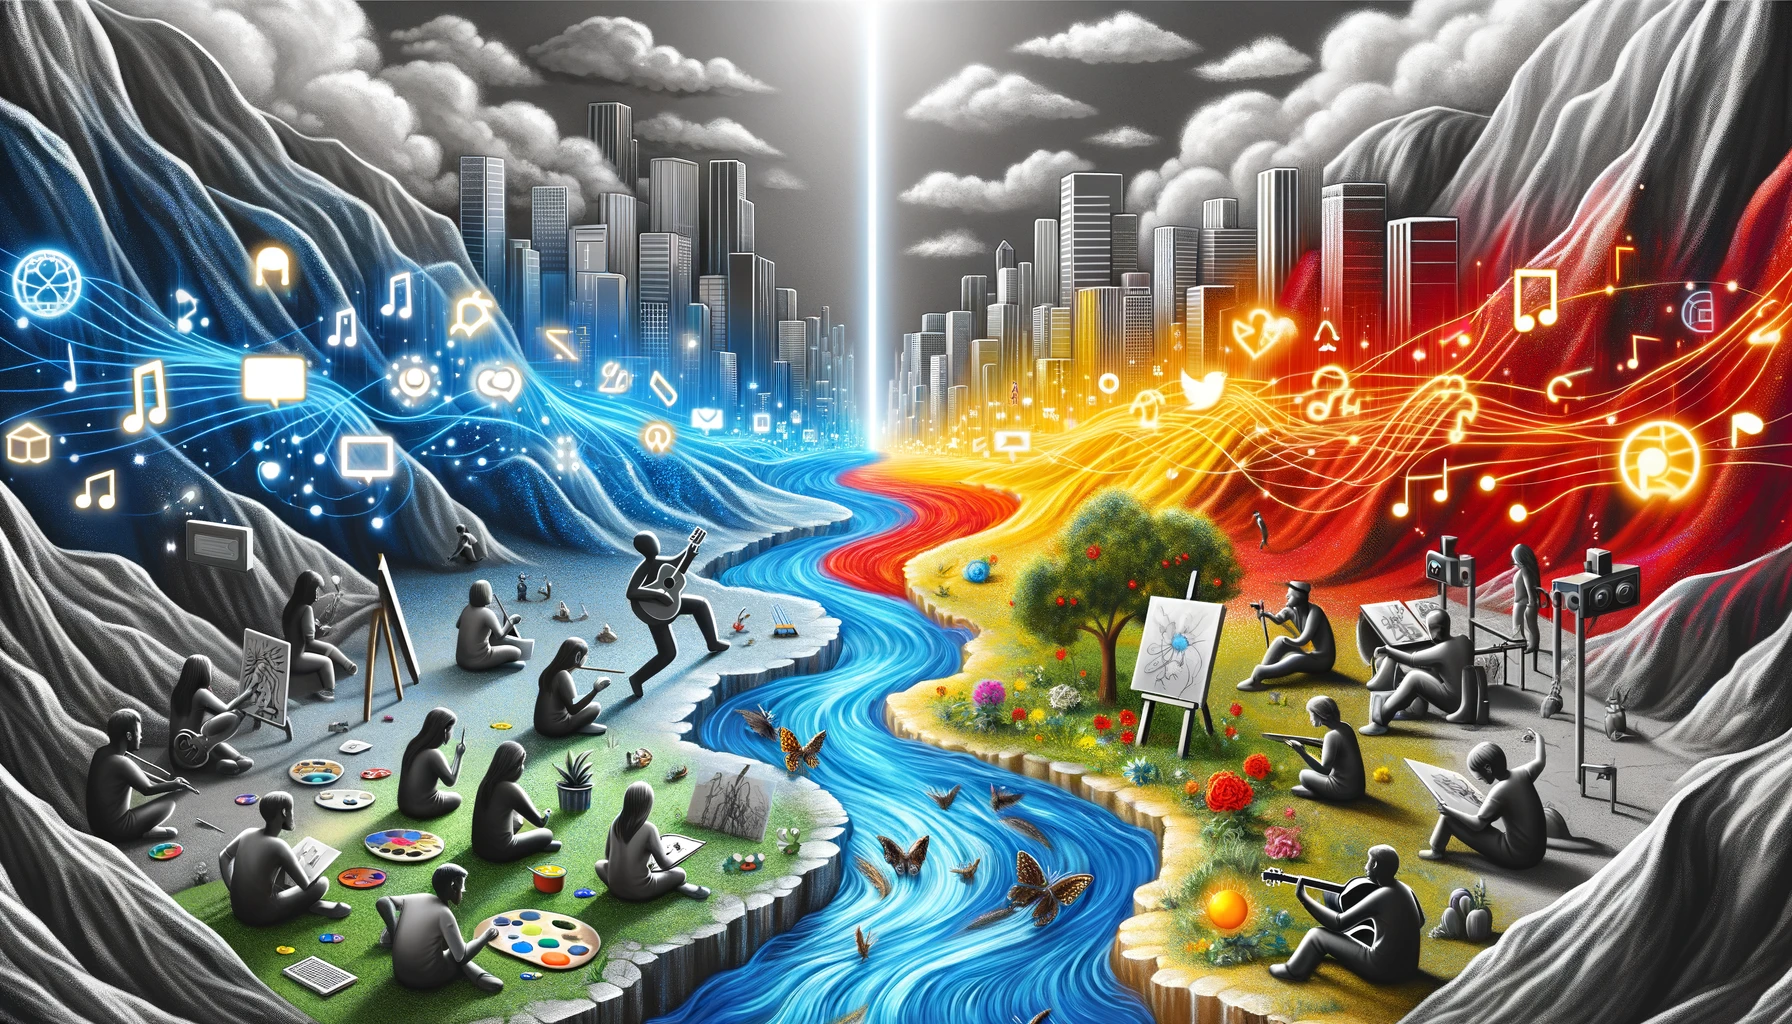 A landscape divided into a digital stream and a creative river, with the former depicted in light gray, dark gray, and bright red, symbolizing media consumption, and the latter in yellow and blue, illustrating people engaging in creative pursuits along its banks, highlighting the balance between digital engagement and personal creativity.